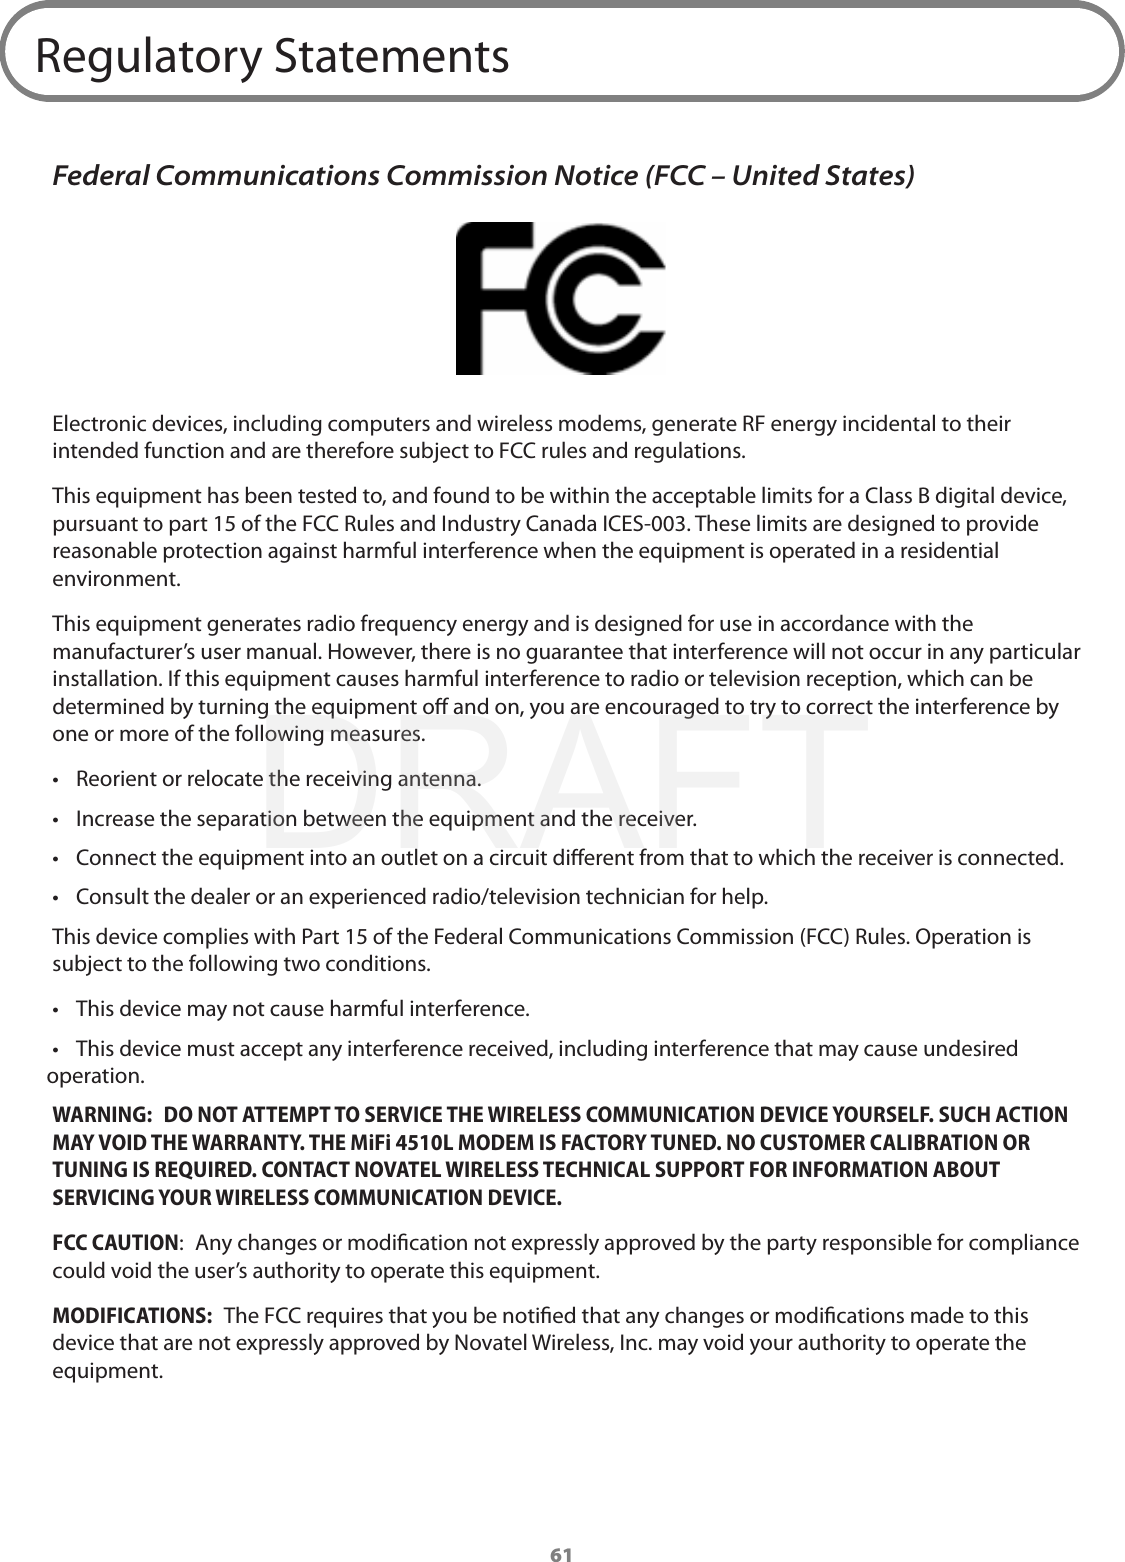 61Regulatory StatementsFederal Communications Commission Notice (FCC – United States)Electronic devices, including computers and wireless modems, generate RF energy incidental to their intended function and are therefore subject to FCC rules and regulations.This equipment has been tested to, and found to be within the acceptable limits for a Class B digital device, pursuant to part 15 of the FCC Rules and Industry Canada ICES-003. These limits are designed to provide reasonable protection against harmful interference when the equipment is operated in a residential environment.This equipment generates radio frequency energy and is designed for use in accordance with the manufacturer’s user manual. However, there is no guarantee that interference will not occur in any particular installation. If this equipment causes harmful interference to radio or television reception, which can be determined by turning the equipment o and on, you are encouraged to try to correct the interference by one or more of the following measures.•  Reorient or relocate the receiving antenna.•  Increase the separation between the equipment and the receiver.•  Connect the equipment into an outlet on a circuit dierent from that to which the receiver is connected.•  Consult the dealer or an experienced radio/television technician for help.This device complies with Part 15 of the Federal Communications Commission (FCC) Rules. Operation is subject to the following two conditions.•  This device may not cause harmful interference.•  This device must accept any interference received, including interference that may cause undesired operation.WARNING:  DO NOT ATTEMPT TO SERVICE THE WIRELESS COMMUNICATION DEVICE YOURSELF. SUCH ACTION MAY VOID THE WARRANTY. THE MiFi 4510L MODEM IS FACTORY TUNED. NO CUSTOMER CALIBRATION OR TUNING IS REQUIRED. CONTACT NOVATEL WIRELESS TECHNICAL SUPPORT FOR INFORMATION ABOUT SERVICING YOUR WIRELESS COMMUNICATION DEVICE.FCC CAUTION:  Any changes or modication not expressly approved by the party responsible for compliance could void the user’s authority to operate this equipment.MODIFICATIONS:  The FCC requires that you be notied that any changes or modications made to this device that are not expressly approved by Novatel Wireless, Inc. may void your authority to operate the equipment. DRAFT